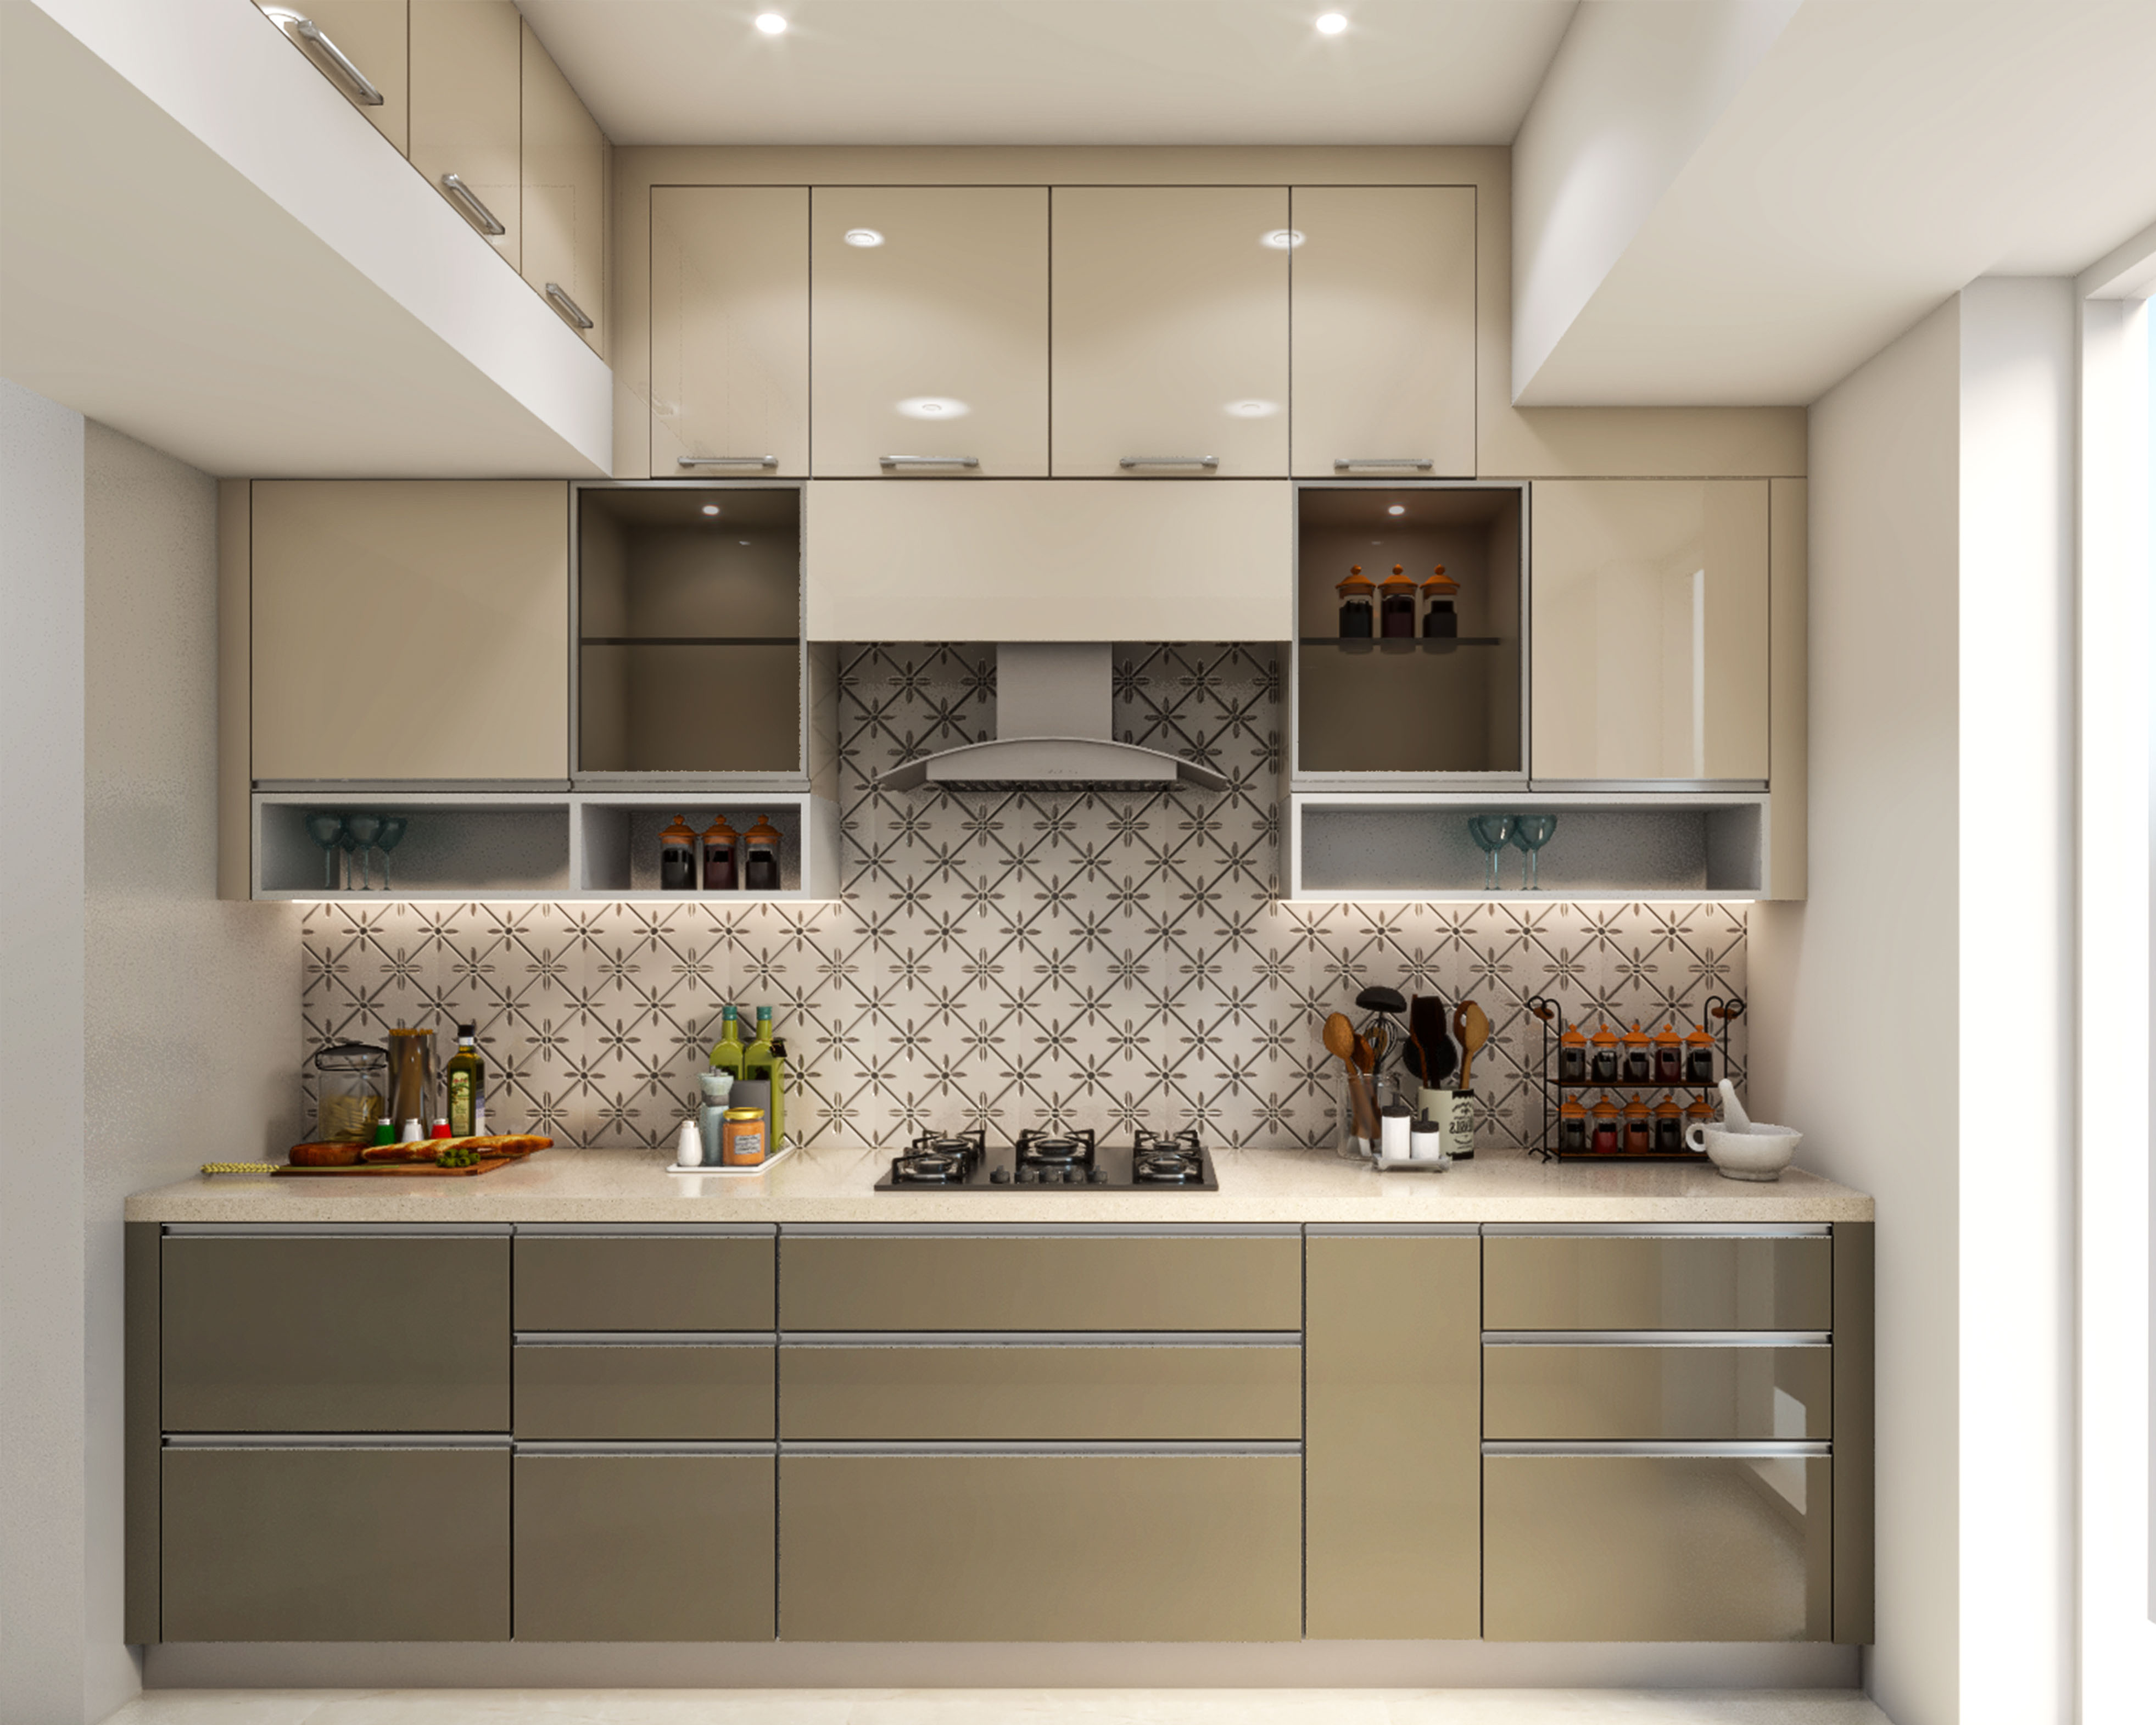 Contemporary Modular Kitchen Design With Brown And Beige Cabinets